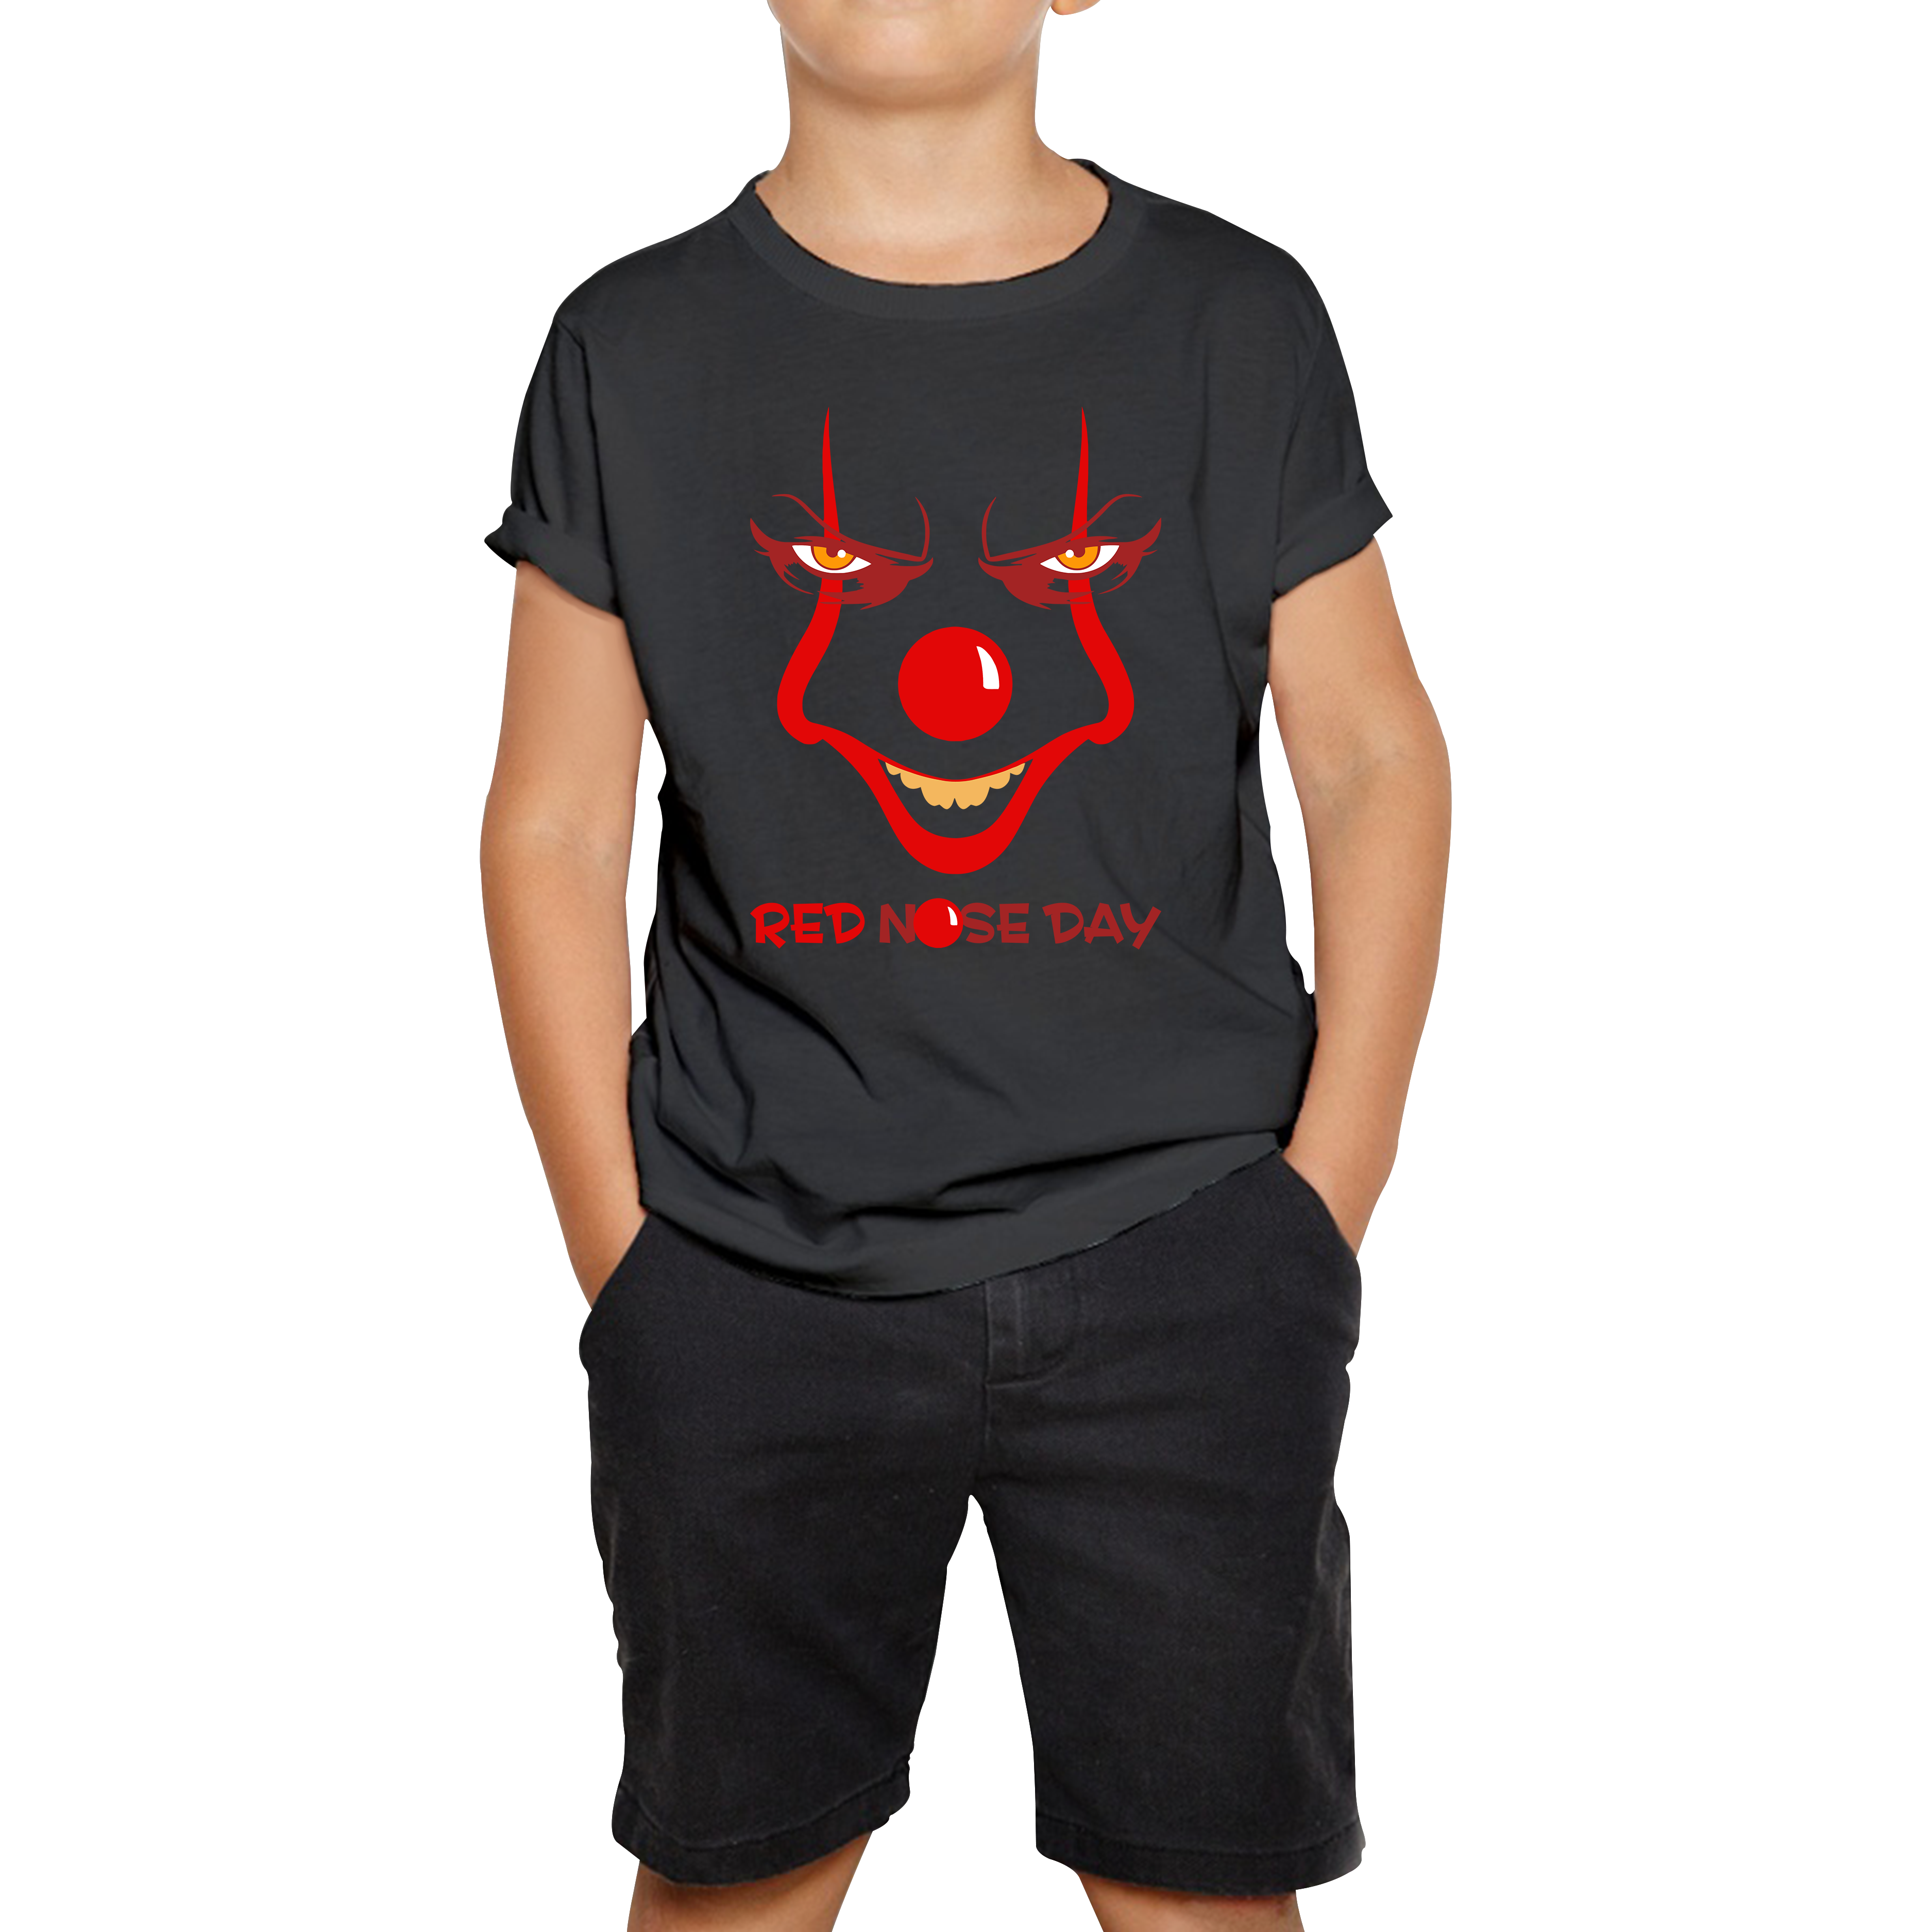 Pennywise Clown Face Red Nose Day Funny Comic Relief Kids T Shirt. 50% Goes To Charity